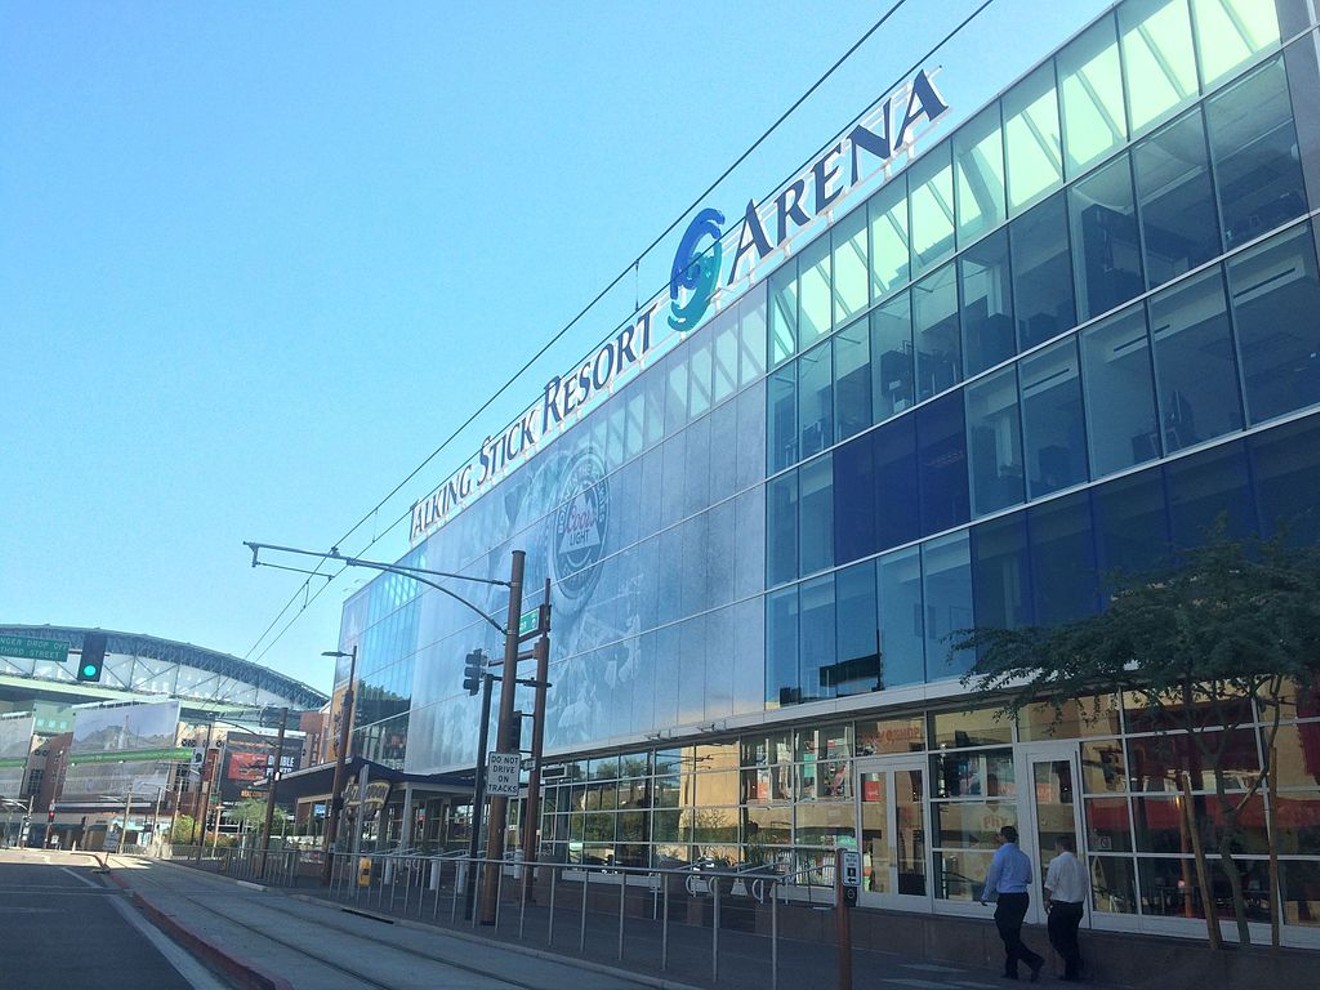 A hasty, $235 million proposal to renovate this arena faced public backlash, but it ultimately passed City Council.